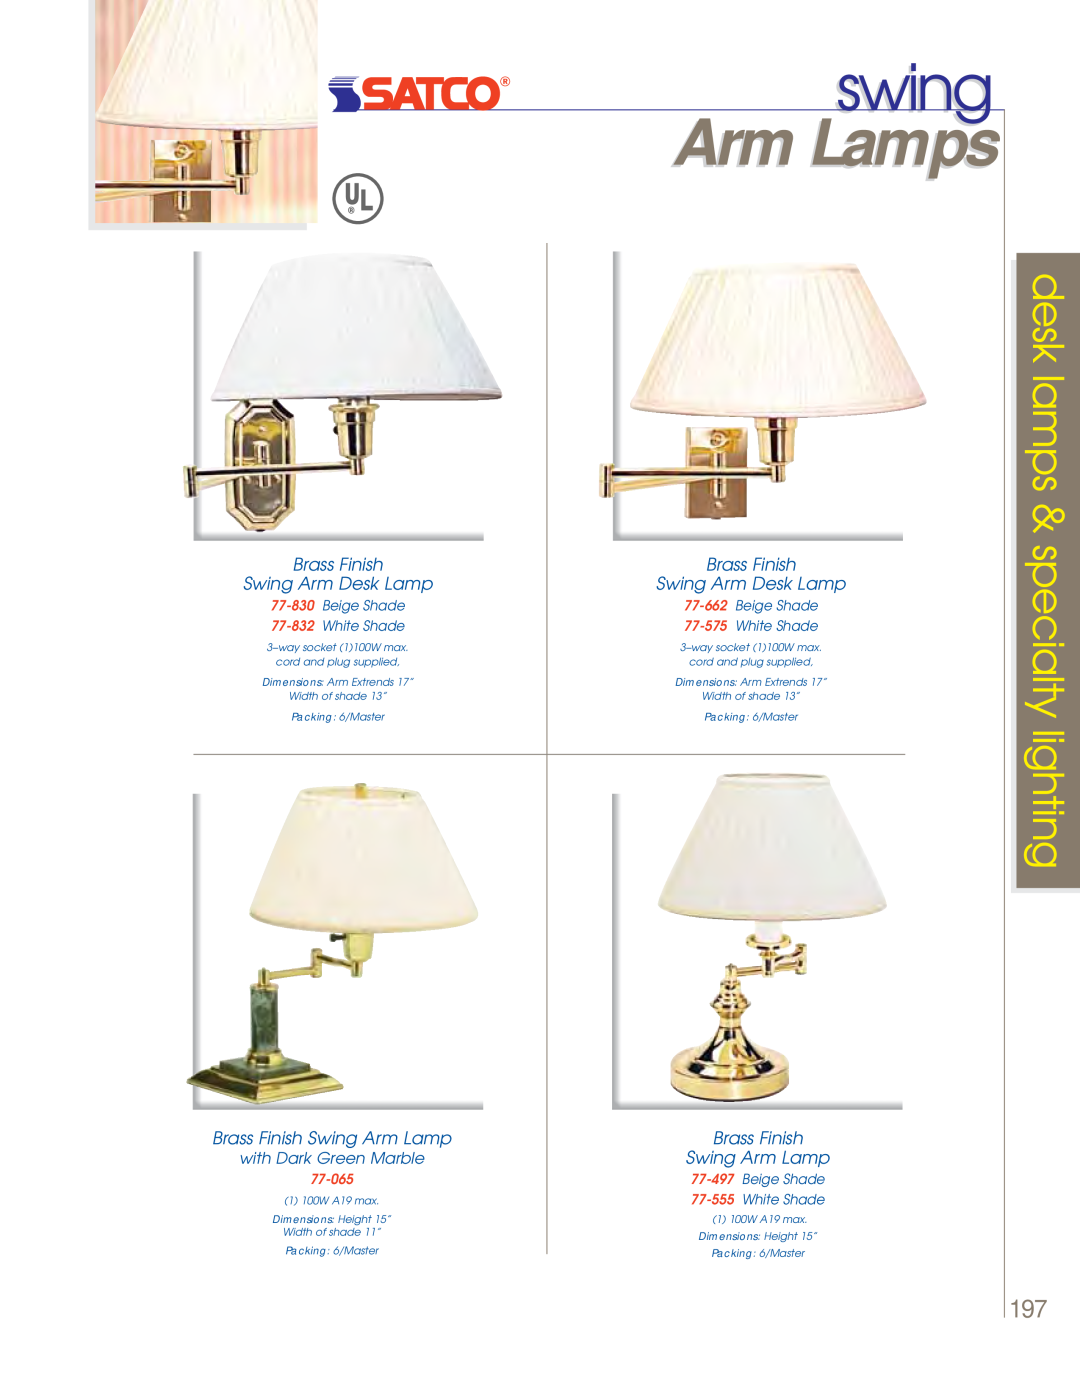 Satco Products 60-800, 60-801 swing, Arm Lamps, desk lamps & specialty lighting, Brass Finish Swing Arm Desk Lamp, 77-065 